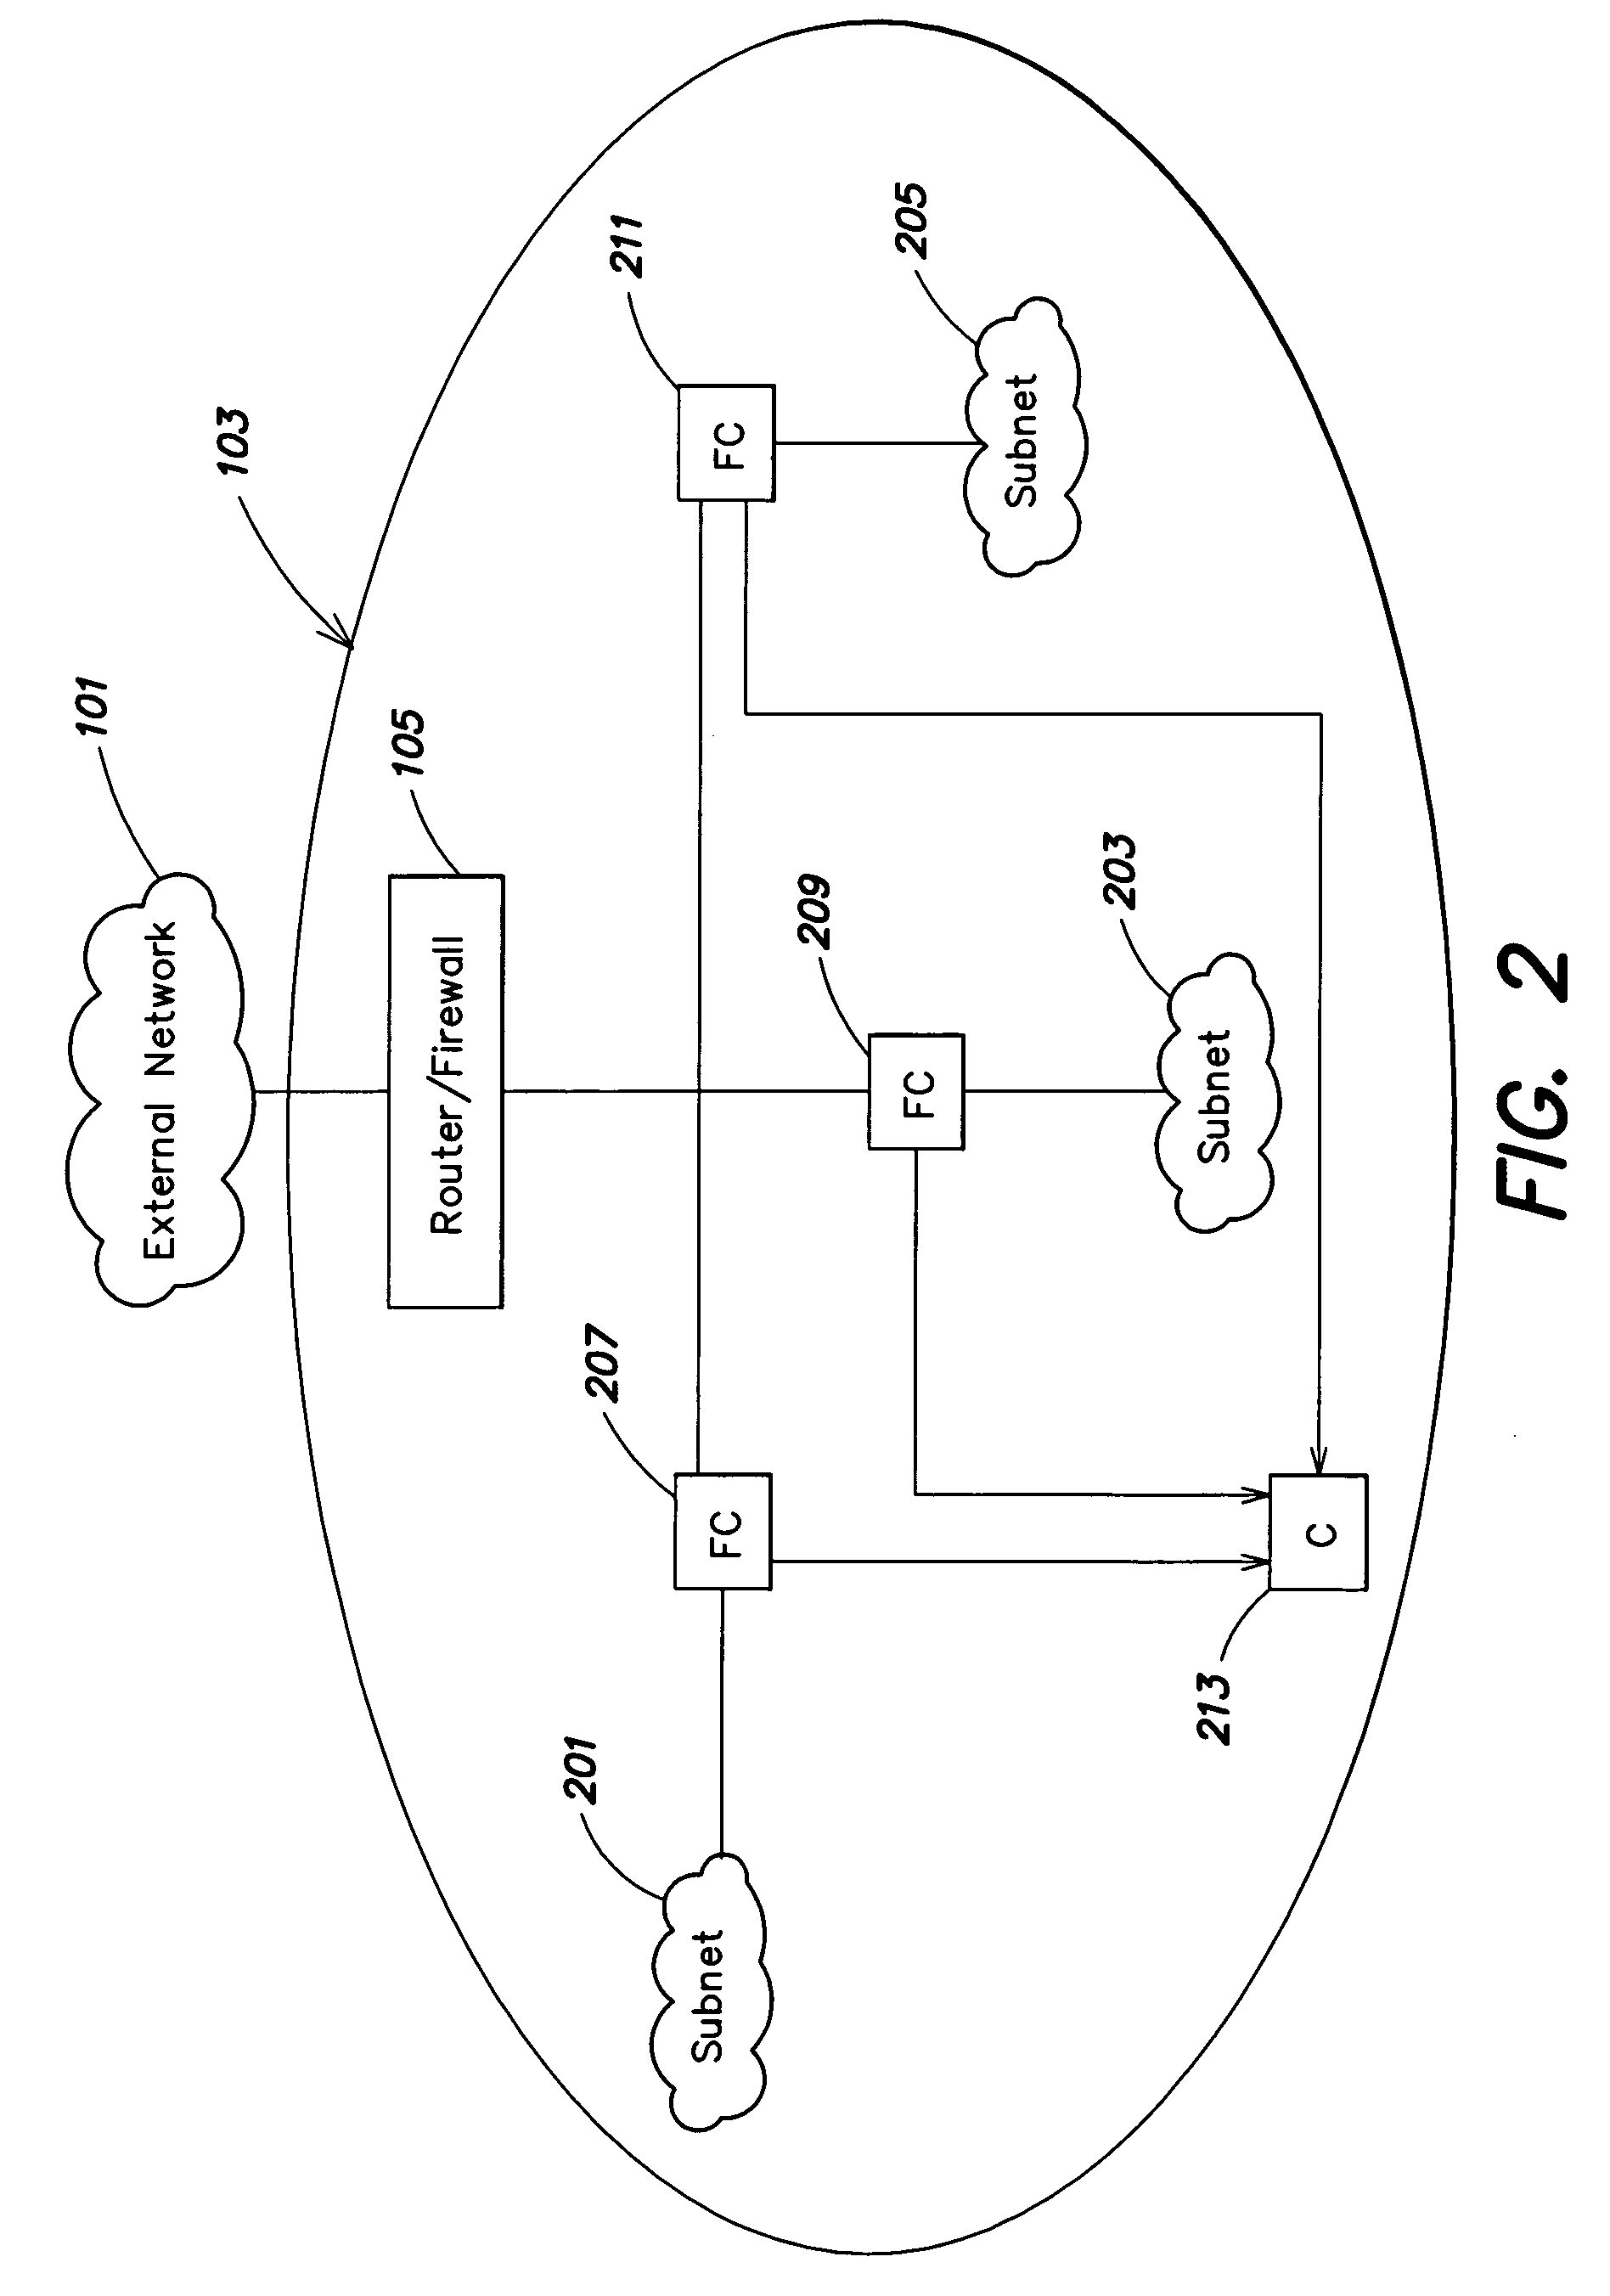 System and method for managing computer networks